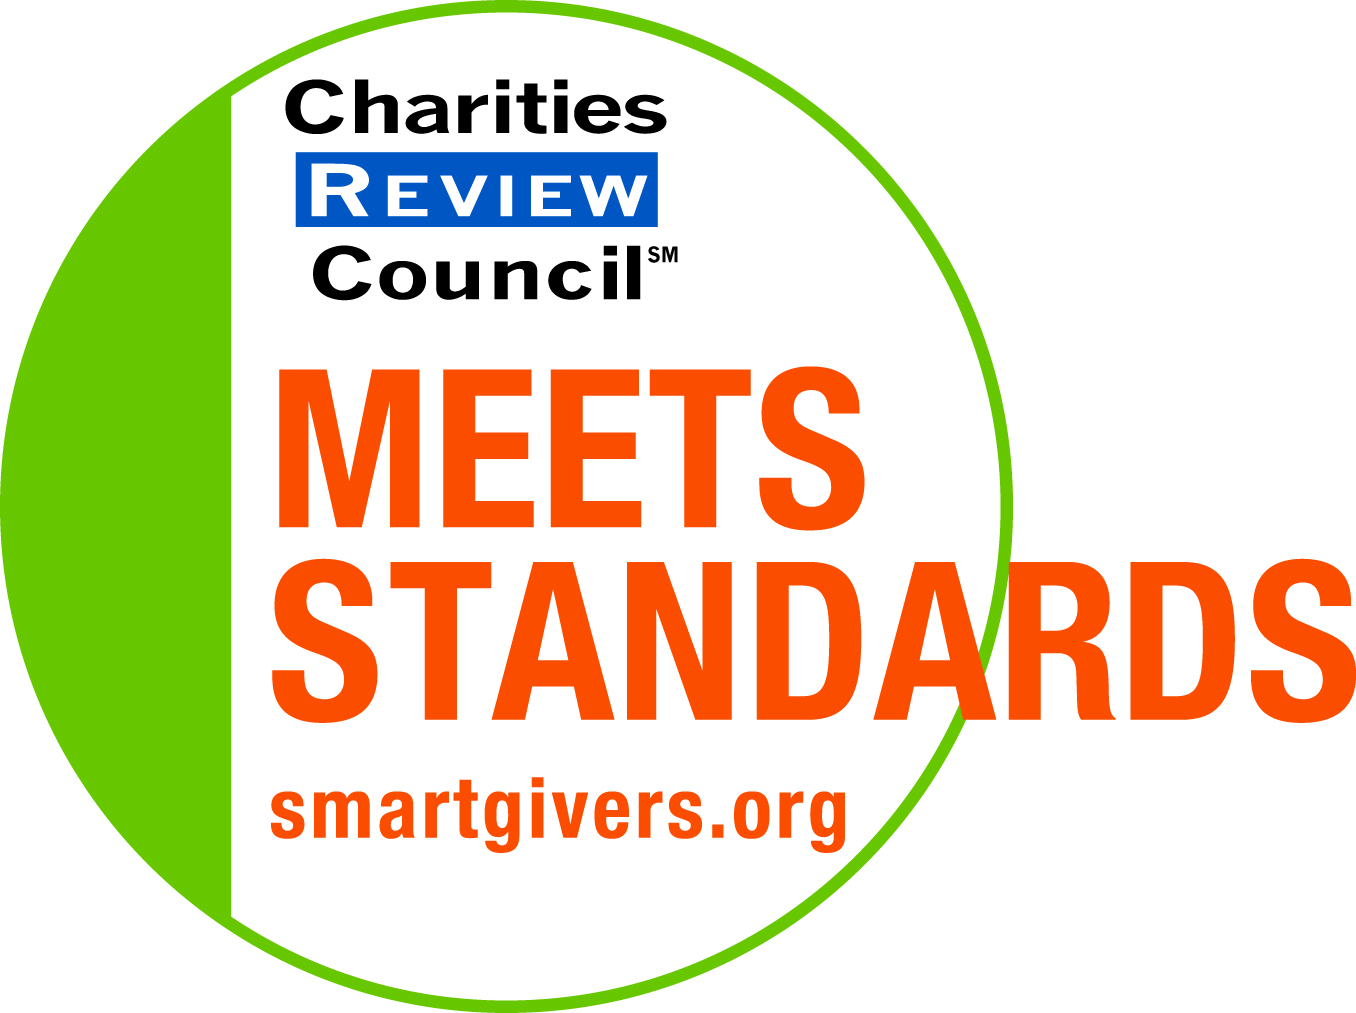 Charities Review Council - Meets Stanards